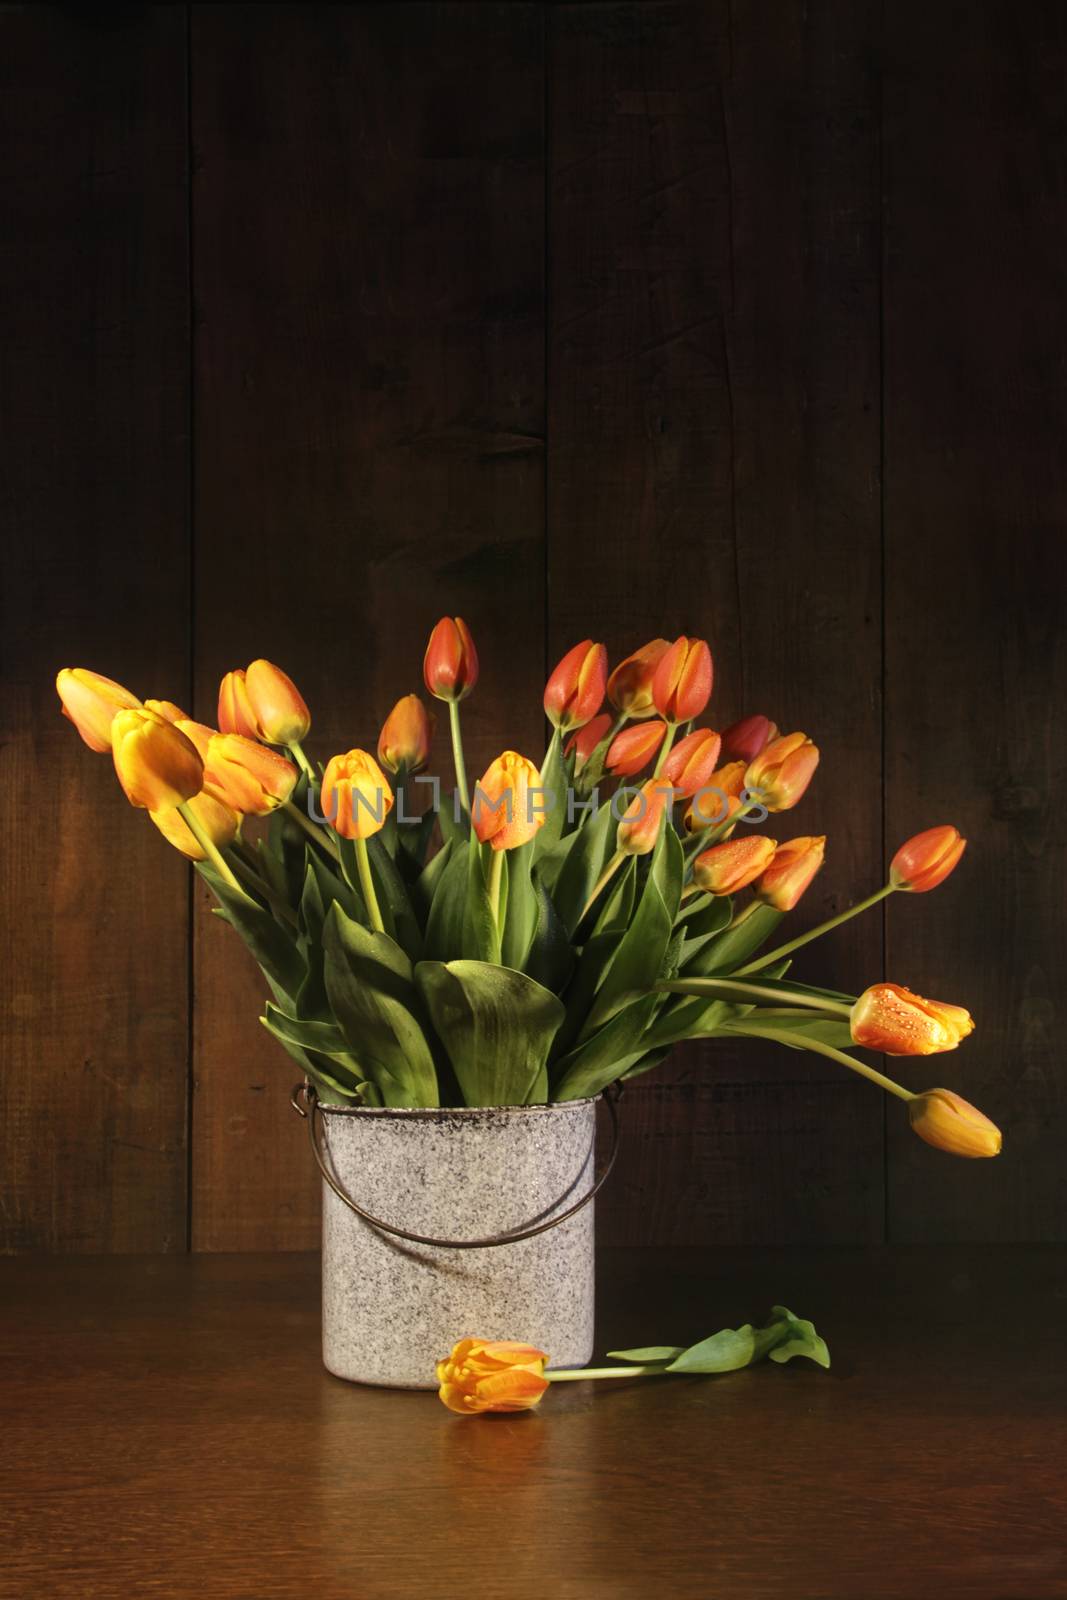 Tulips in old bucket by Sandralise